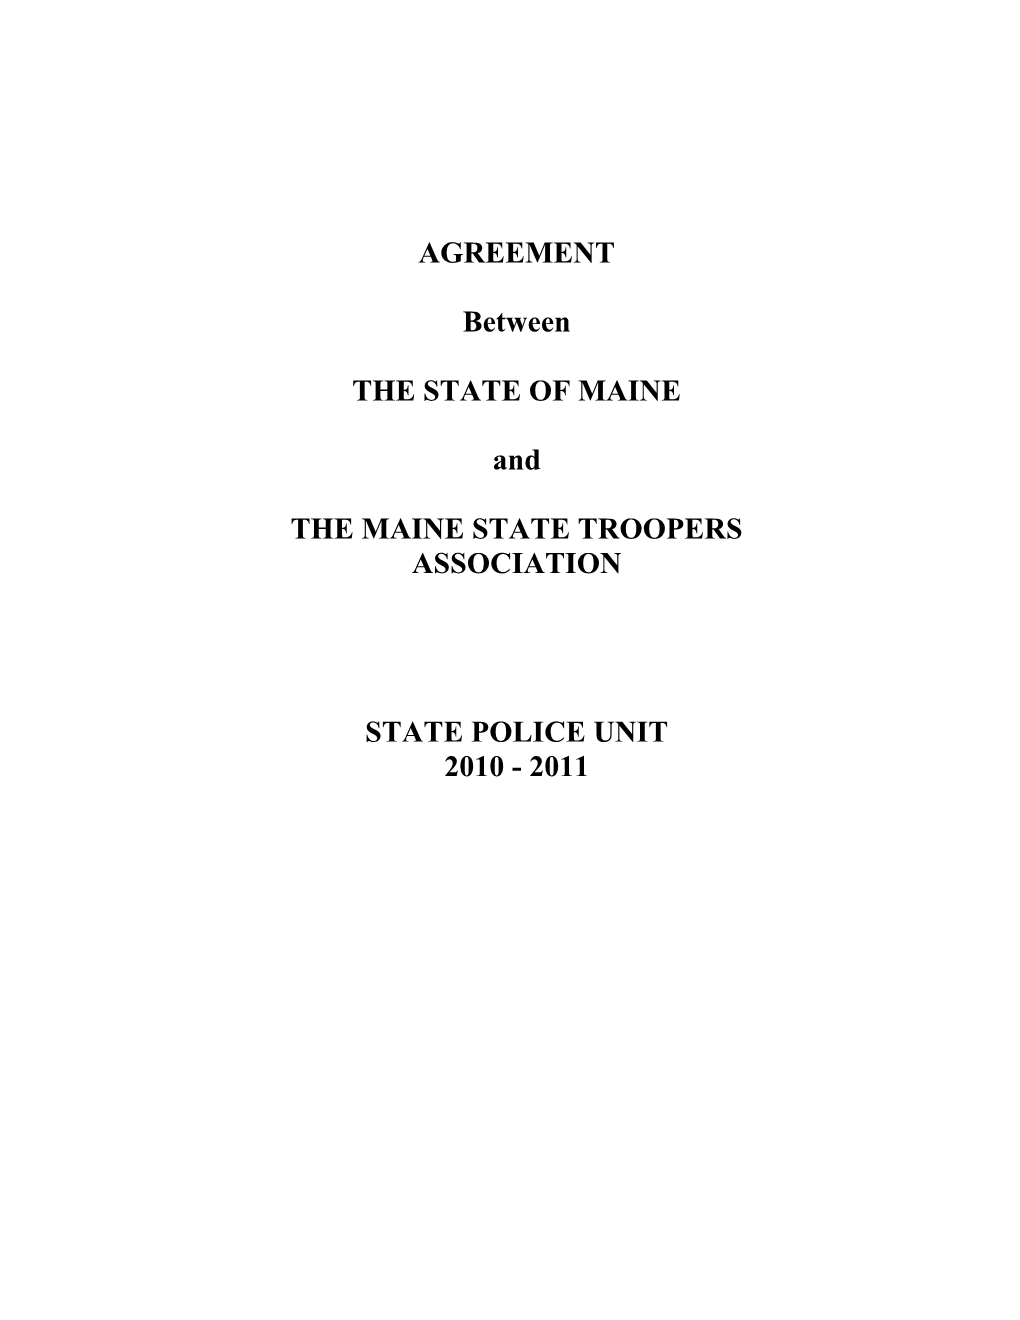 The Maine State Troopers Association